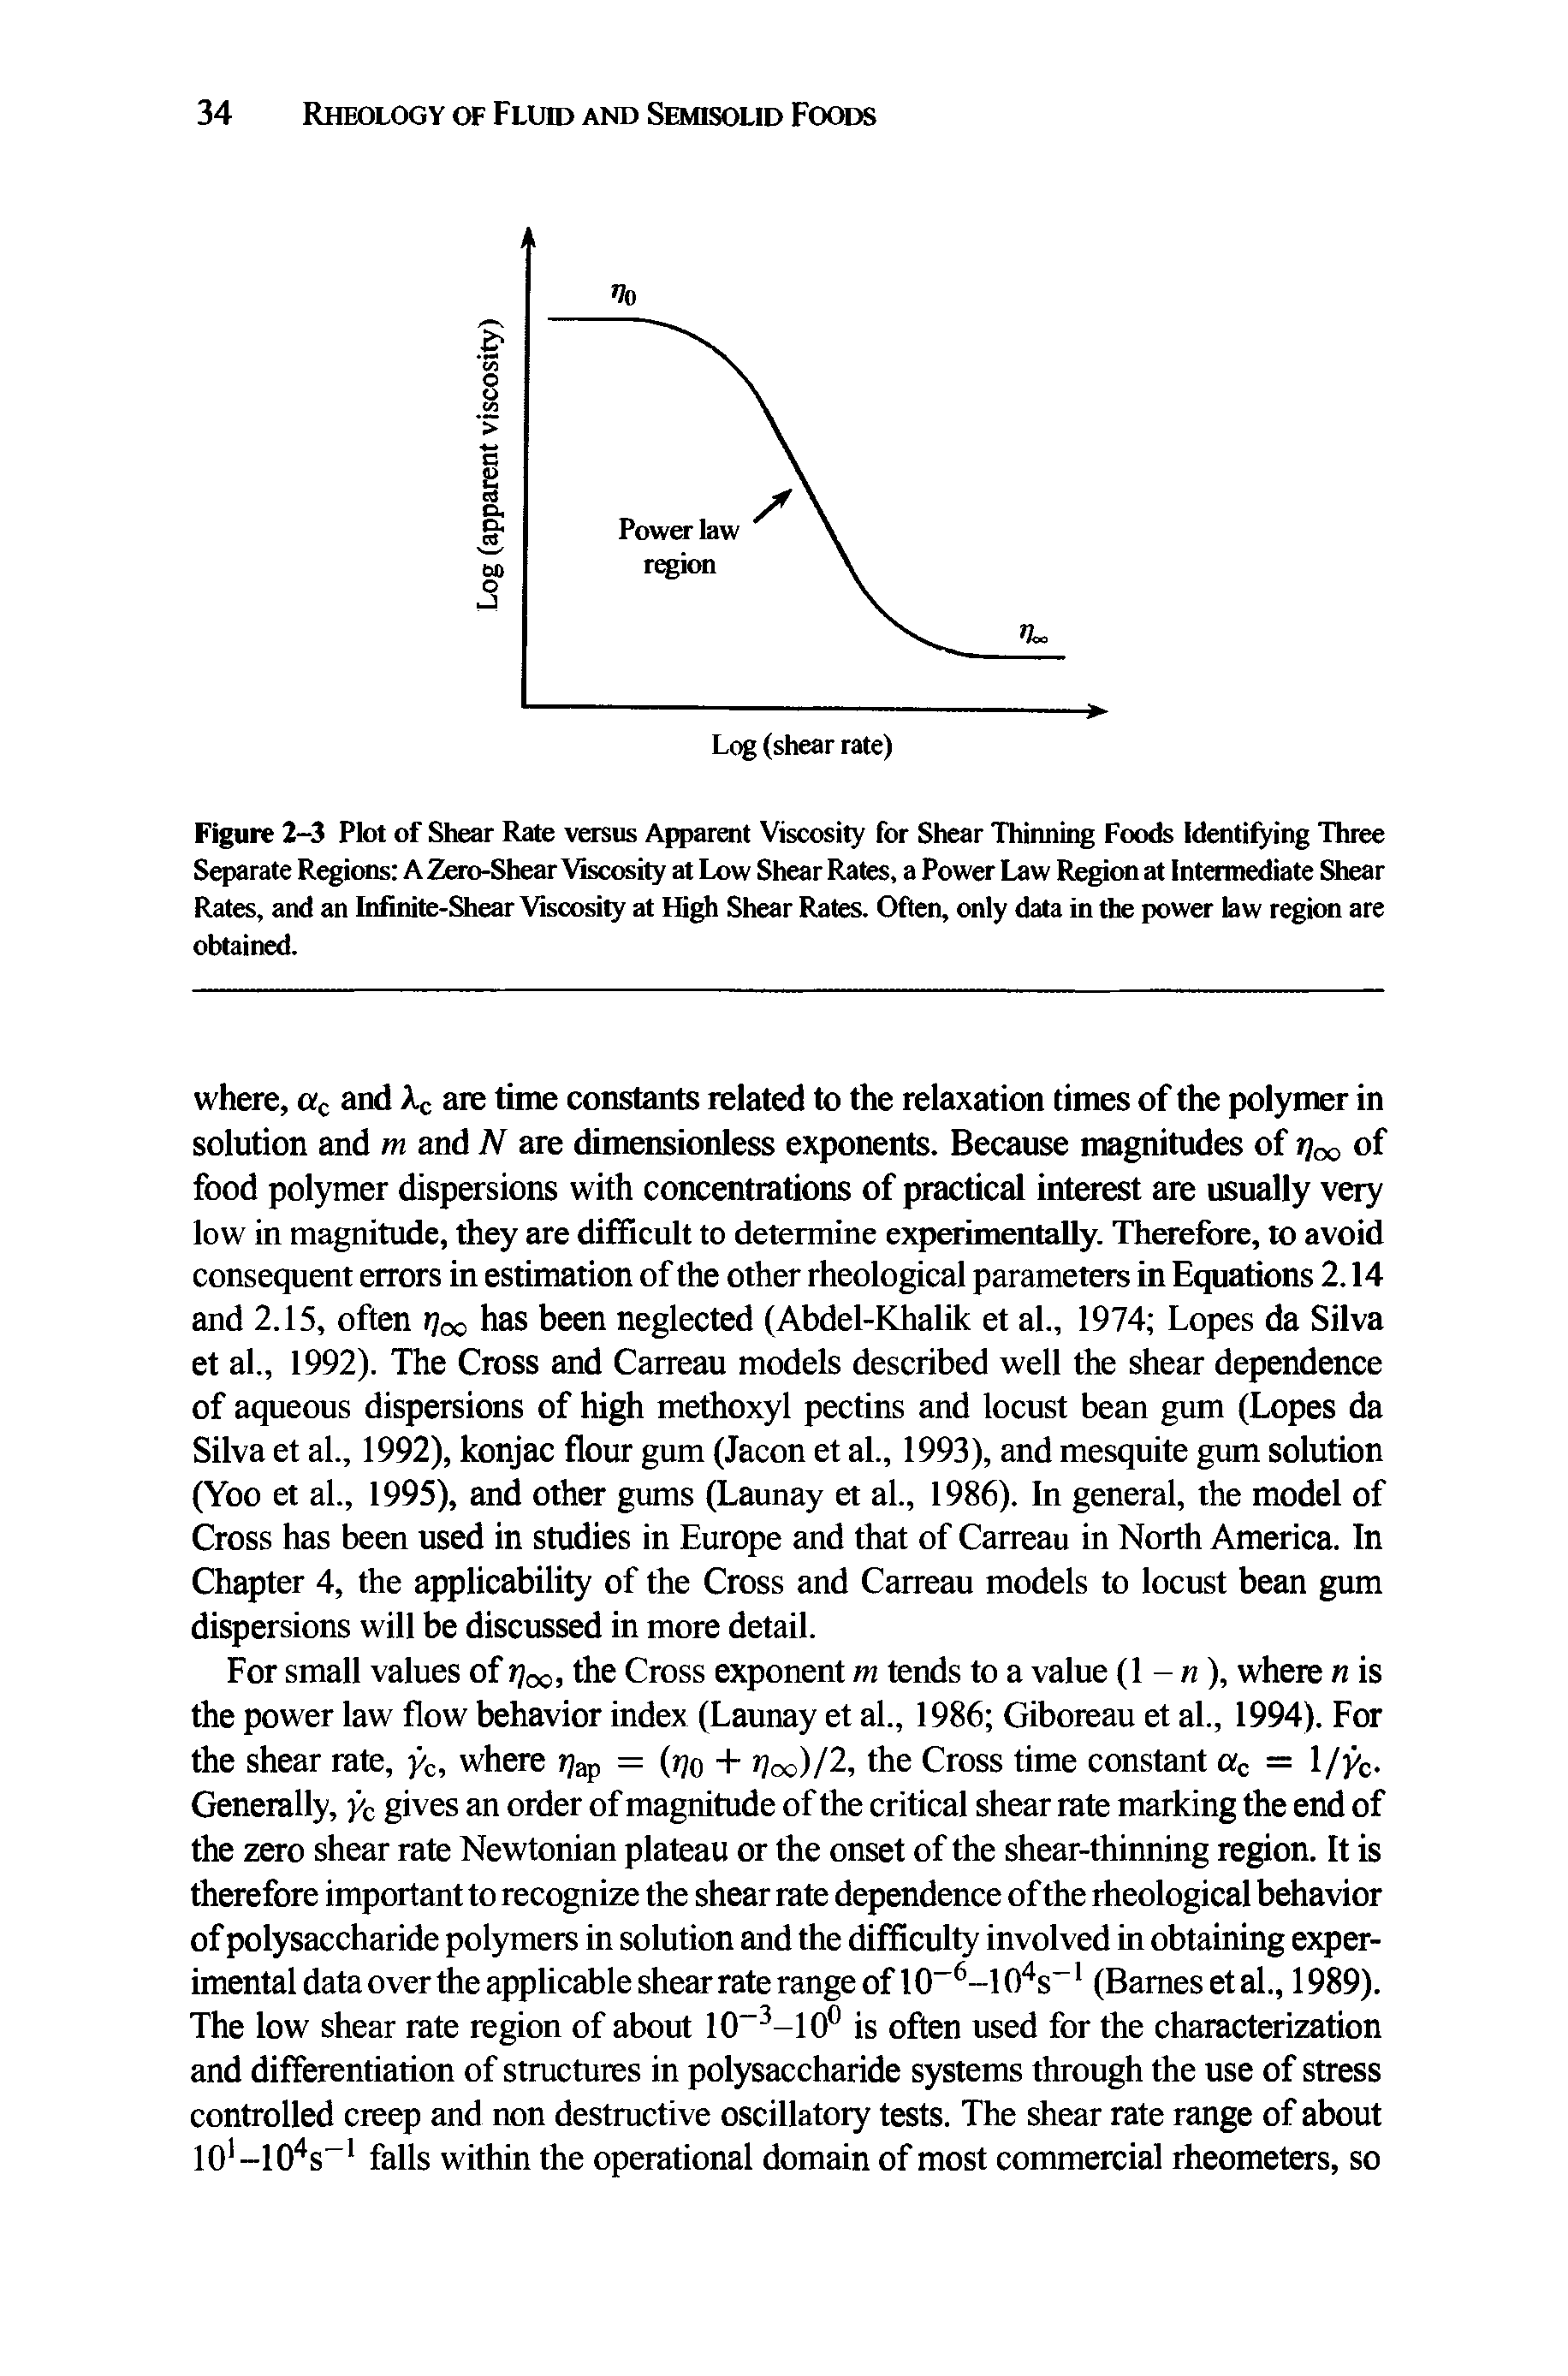 Figure 2-3 Plot of Shear Rate versus Apparent Viscosity for Shear Thinning Foods Identifying Three Separate Regions A Zero-Shear Viscosity at Low Shear Rates, a Power Law Region at Intermediate Shear Rates, and an Infinite-Shear Viscosity at High Shear Rates. Often, only data in the power law region are obtained.